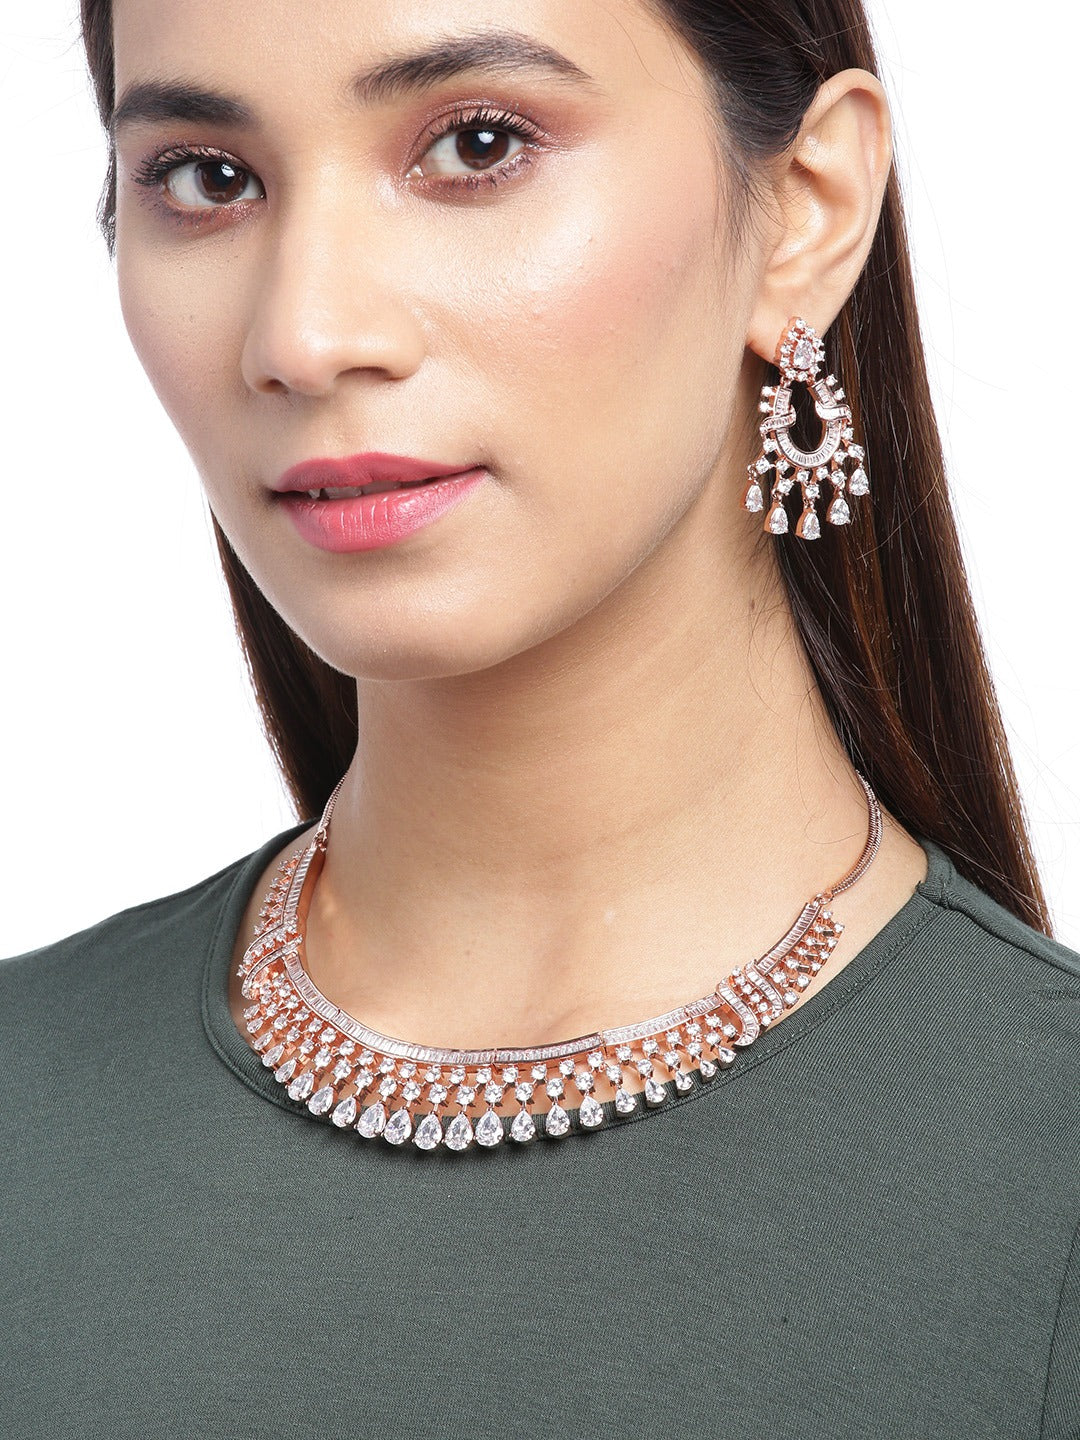 Buy YouBella Jewellery Sets online - Women - 276 products | FASHIOLA INDIA